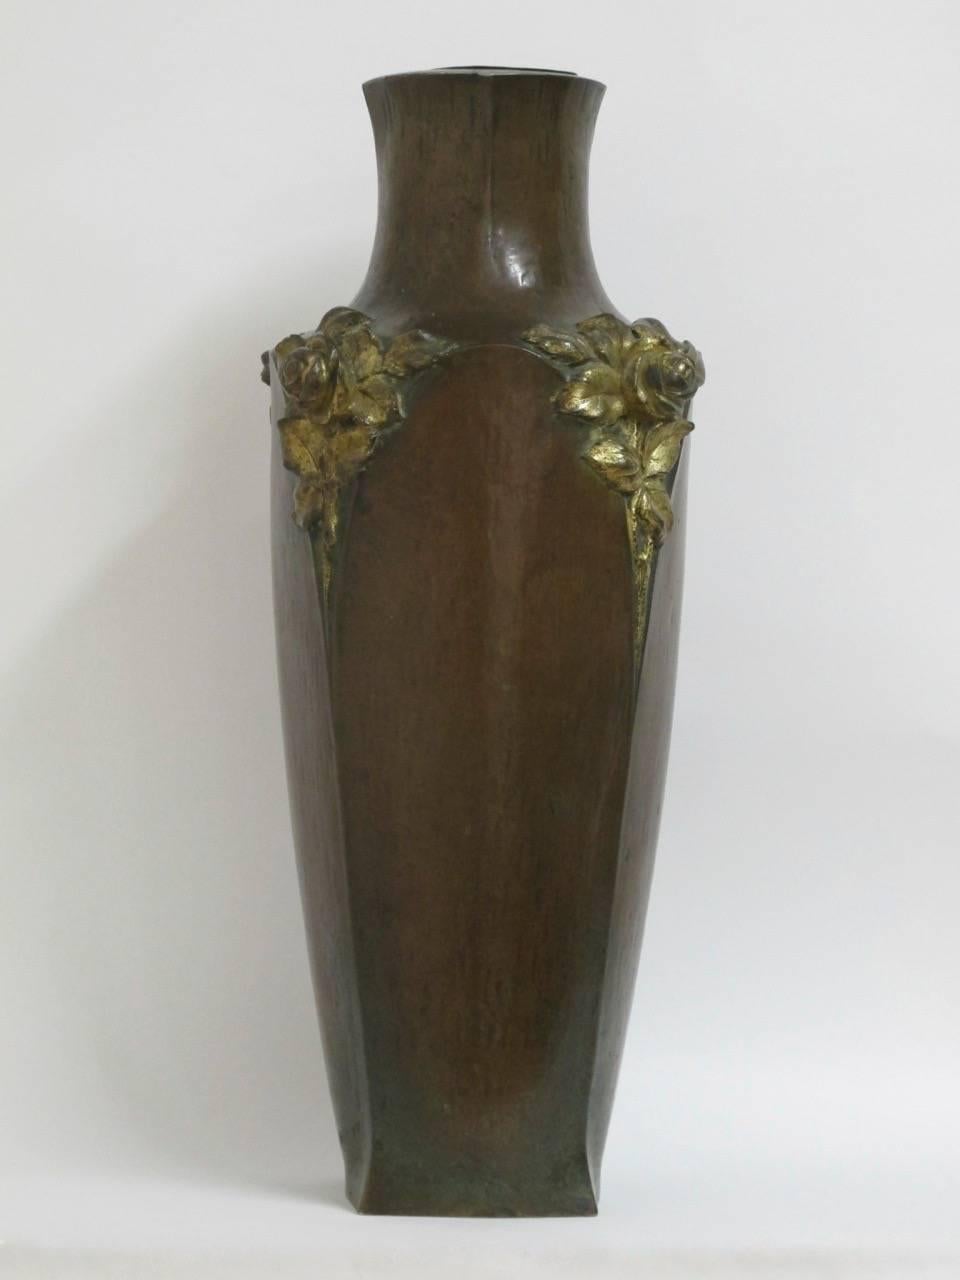 Lovely Art Nouveau period bronze vase by listed French artist Albert Marionnet, mostly known for his sculptures (b.1852 - d.1910).